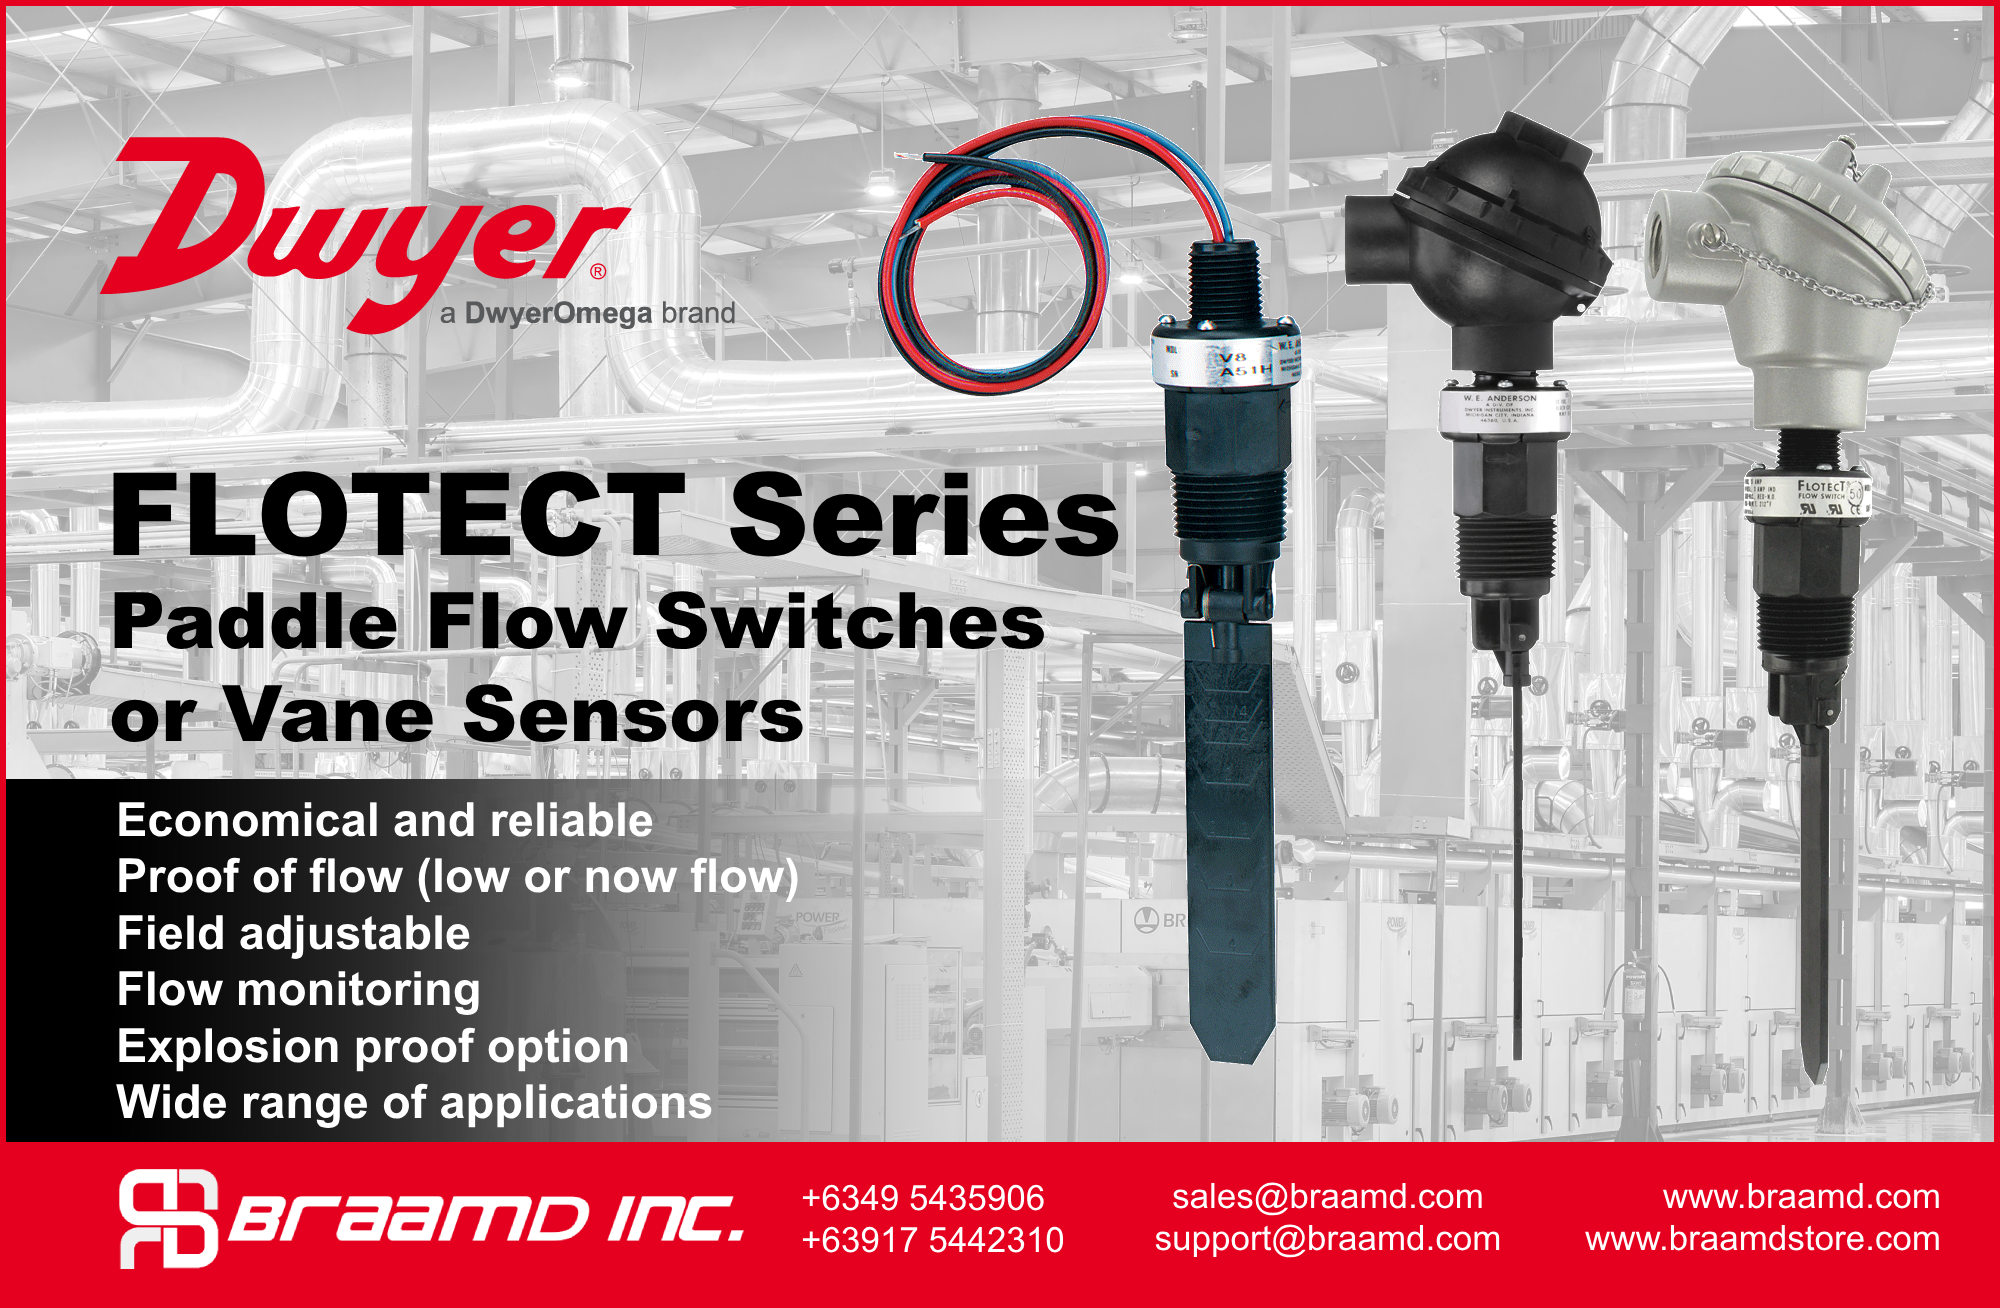 Dwyer Paddle Flow Switches or Vane Sensors